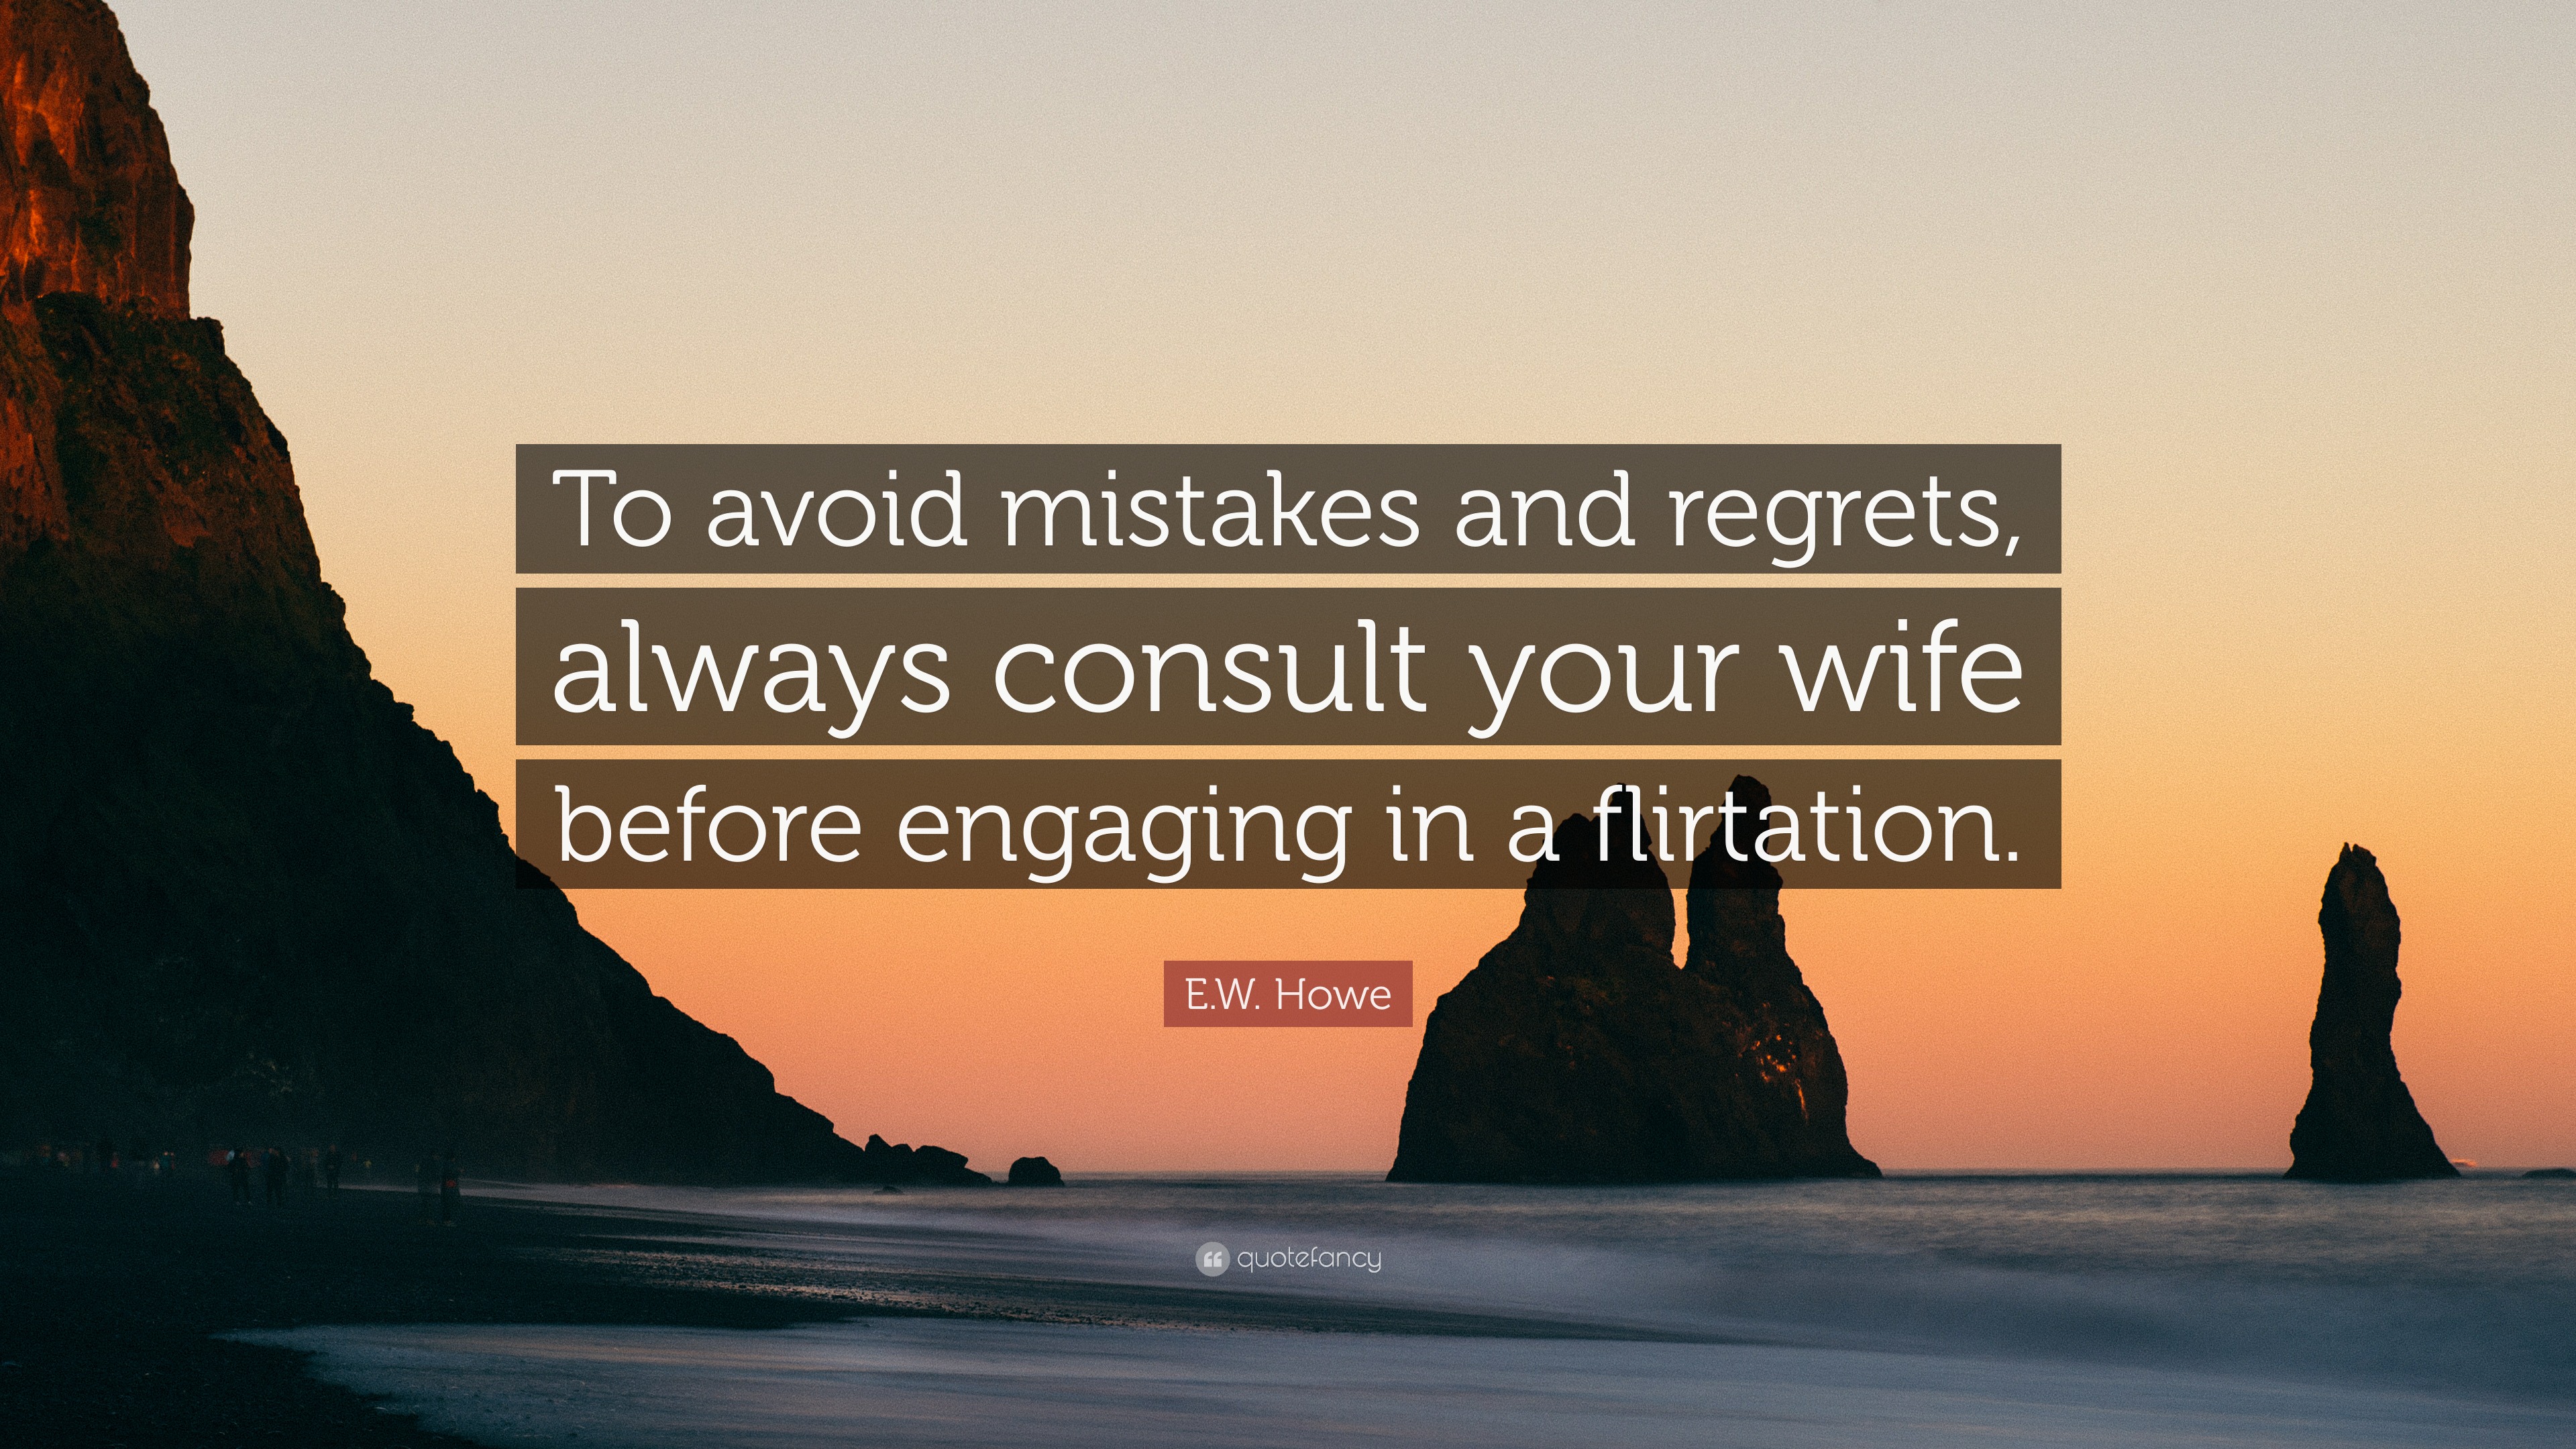 E. W. Howe quote: To avoid mistakes and regrets, always consult